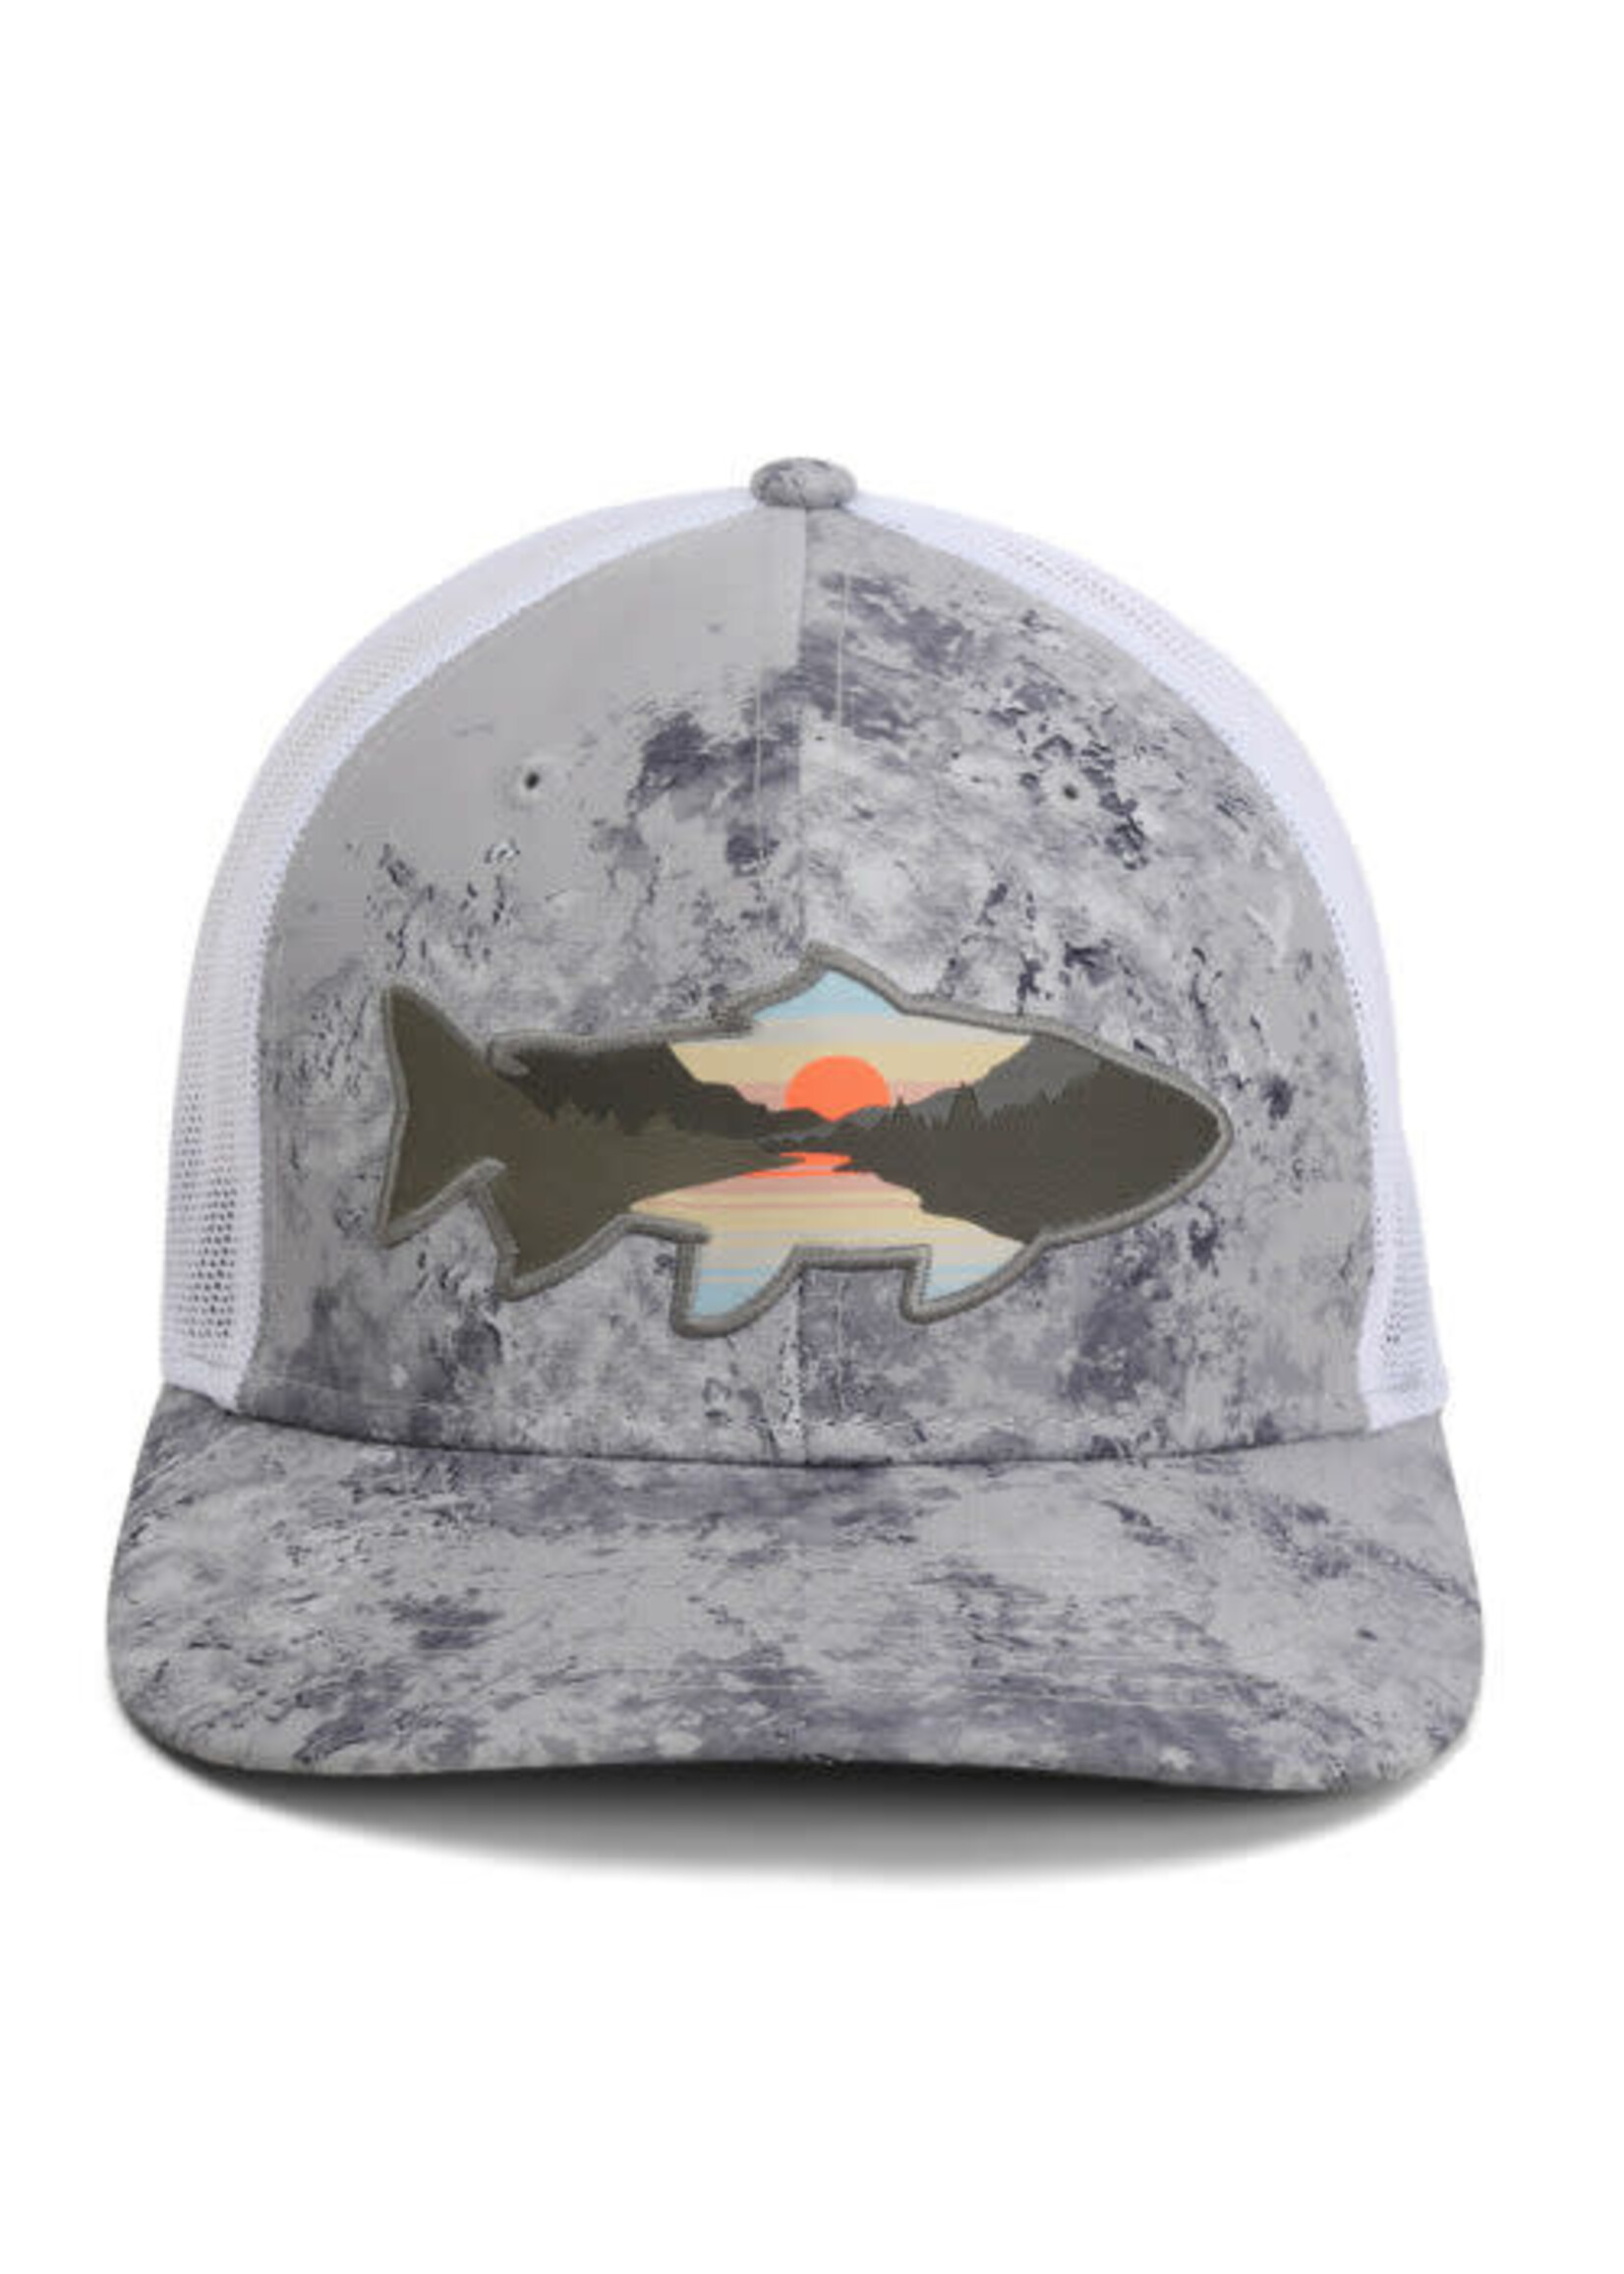 Paramount Paramount Sunset Trout Fly Fishing Mesh Back Hat Fish Mountain Silhouette